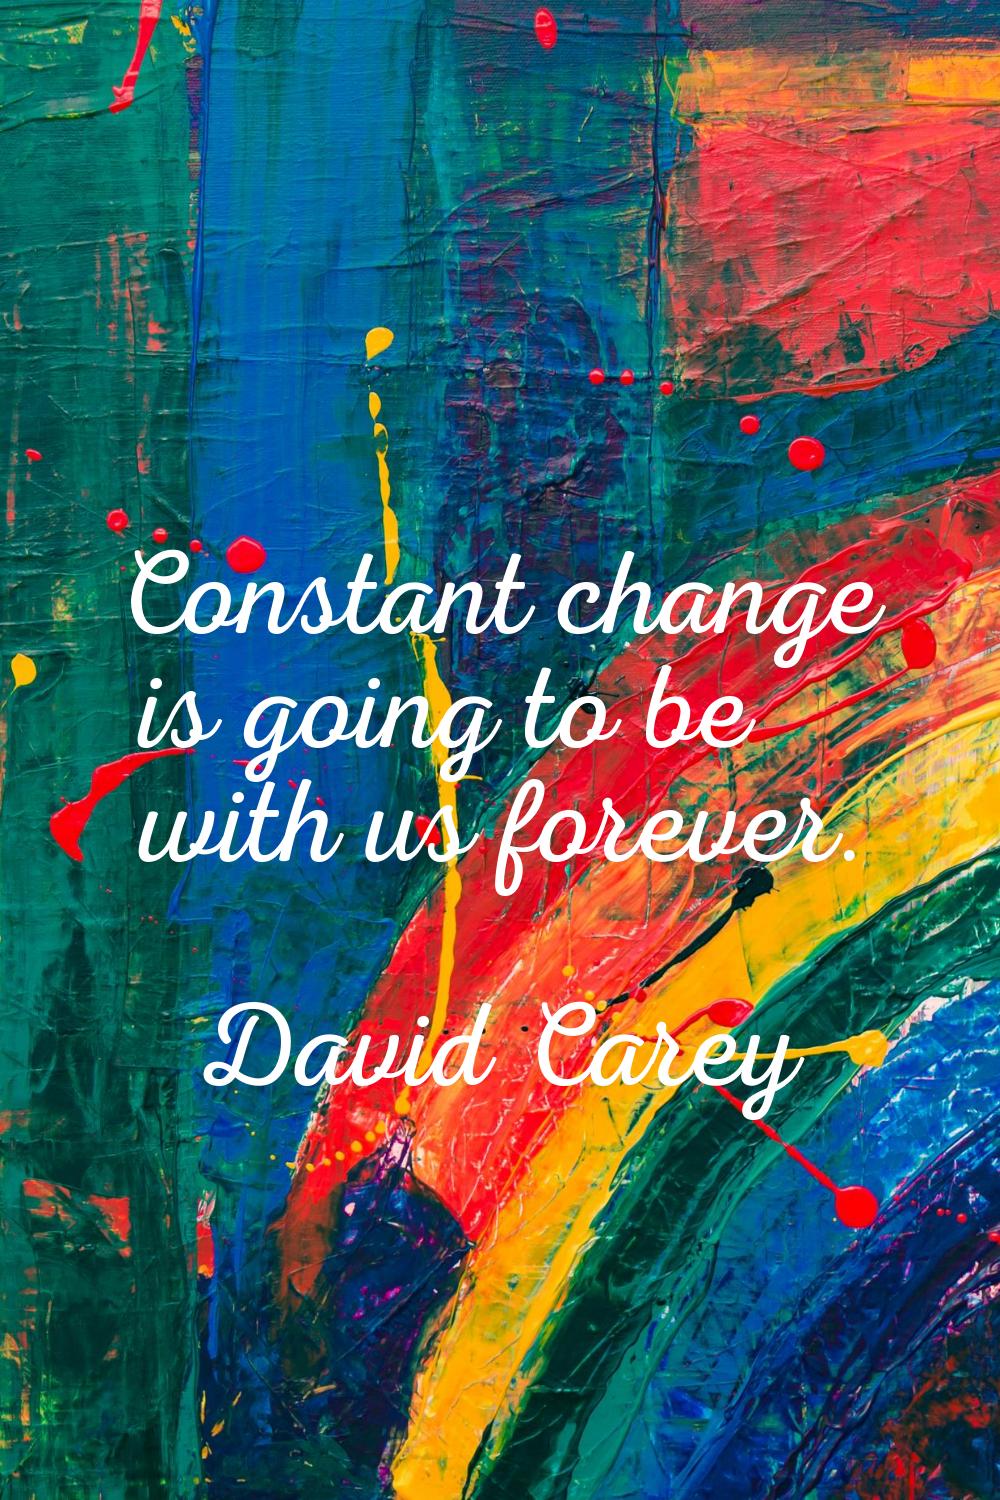 Constant change is going to be with us forever.